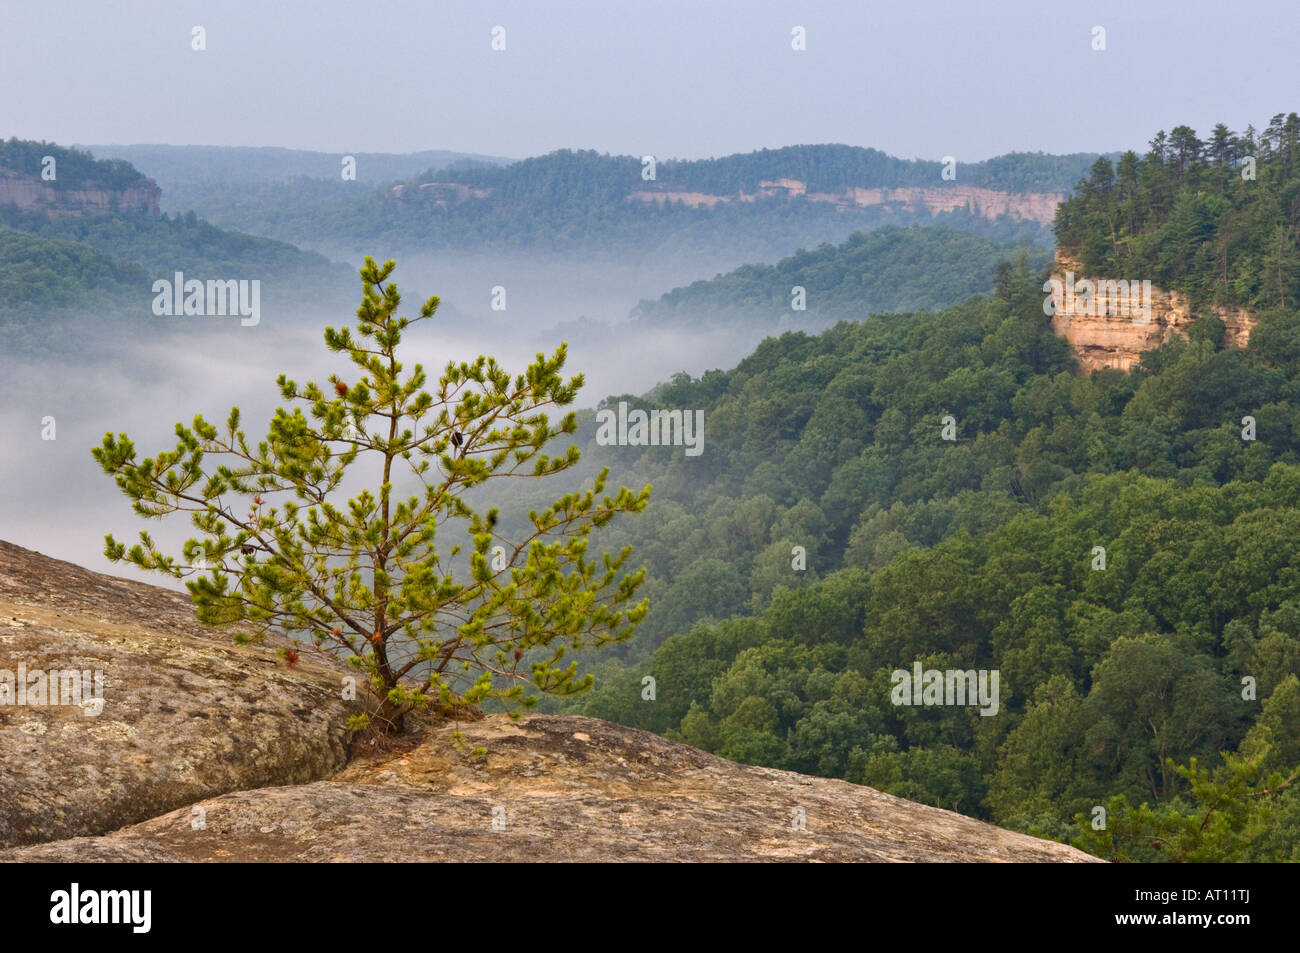 View of Forested Wilderness Area with Morning Mist from Cloud Splitter in Red River Gorge Geological Area Stock Photo